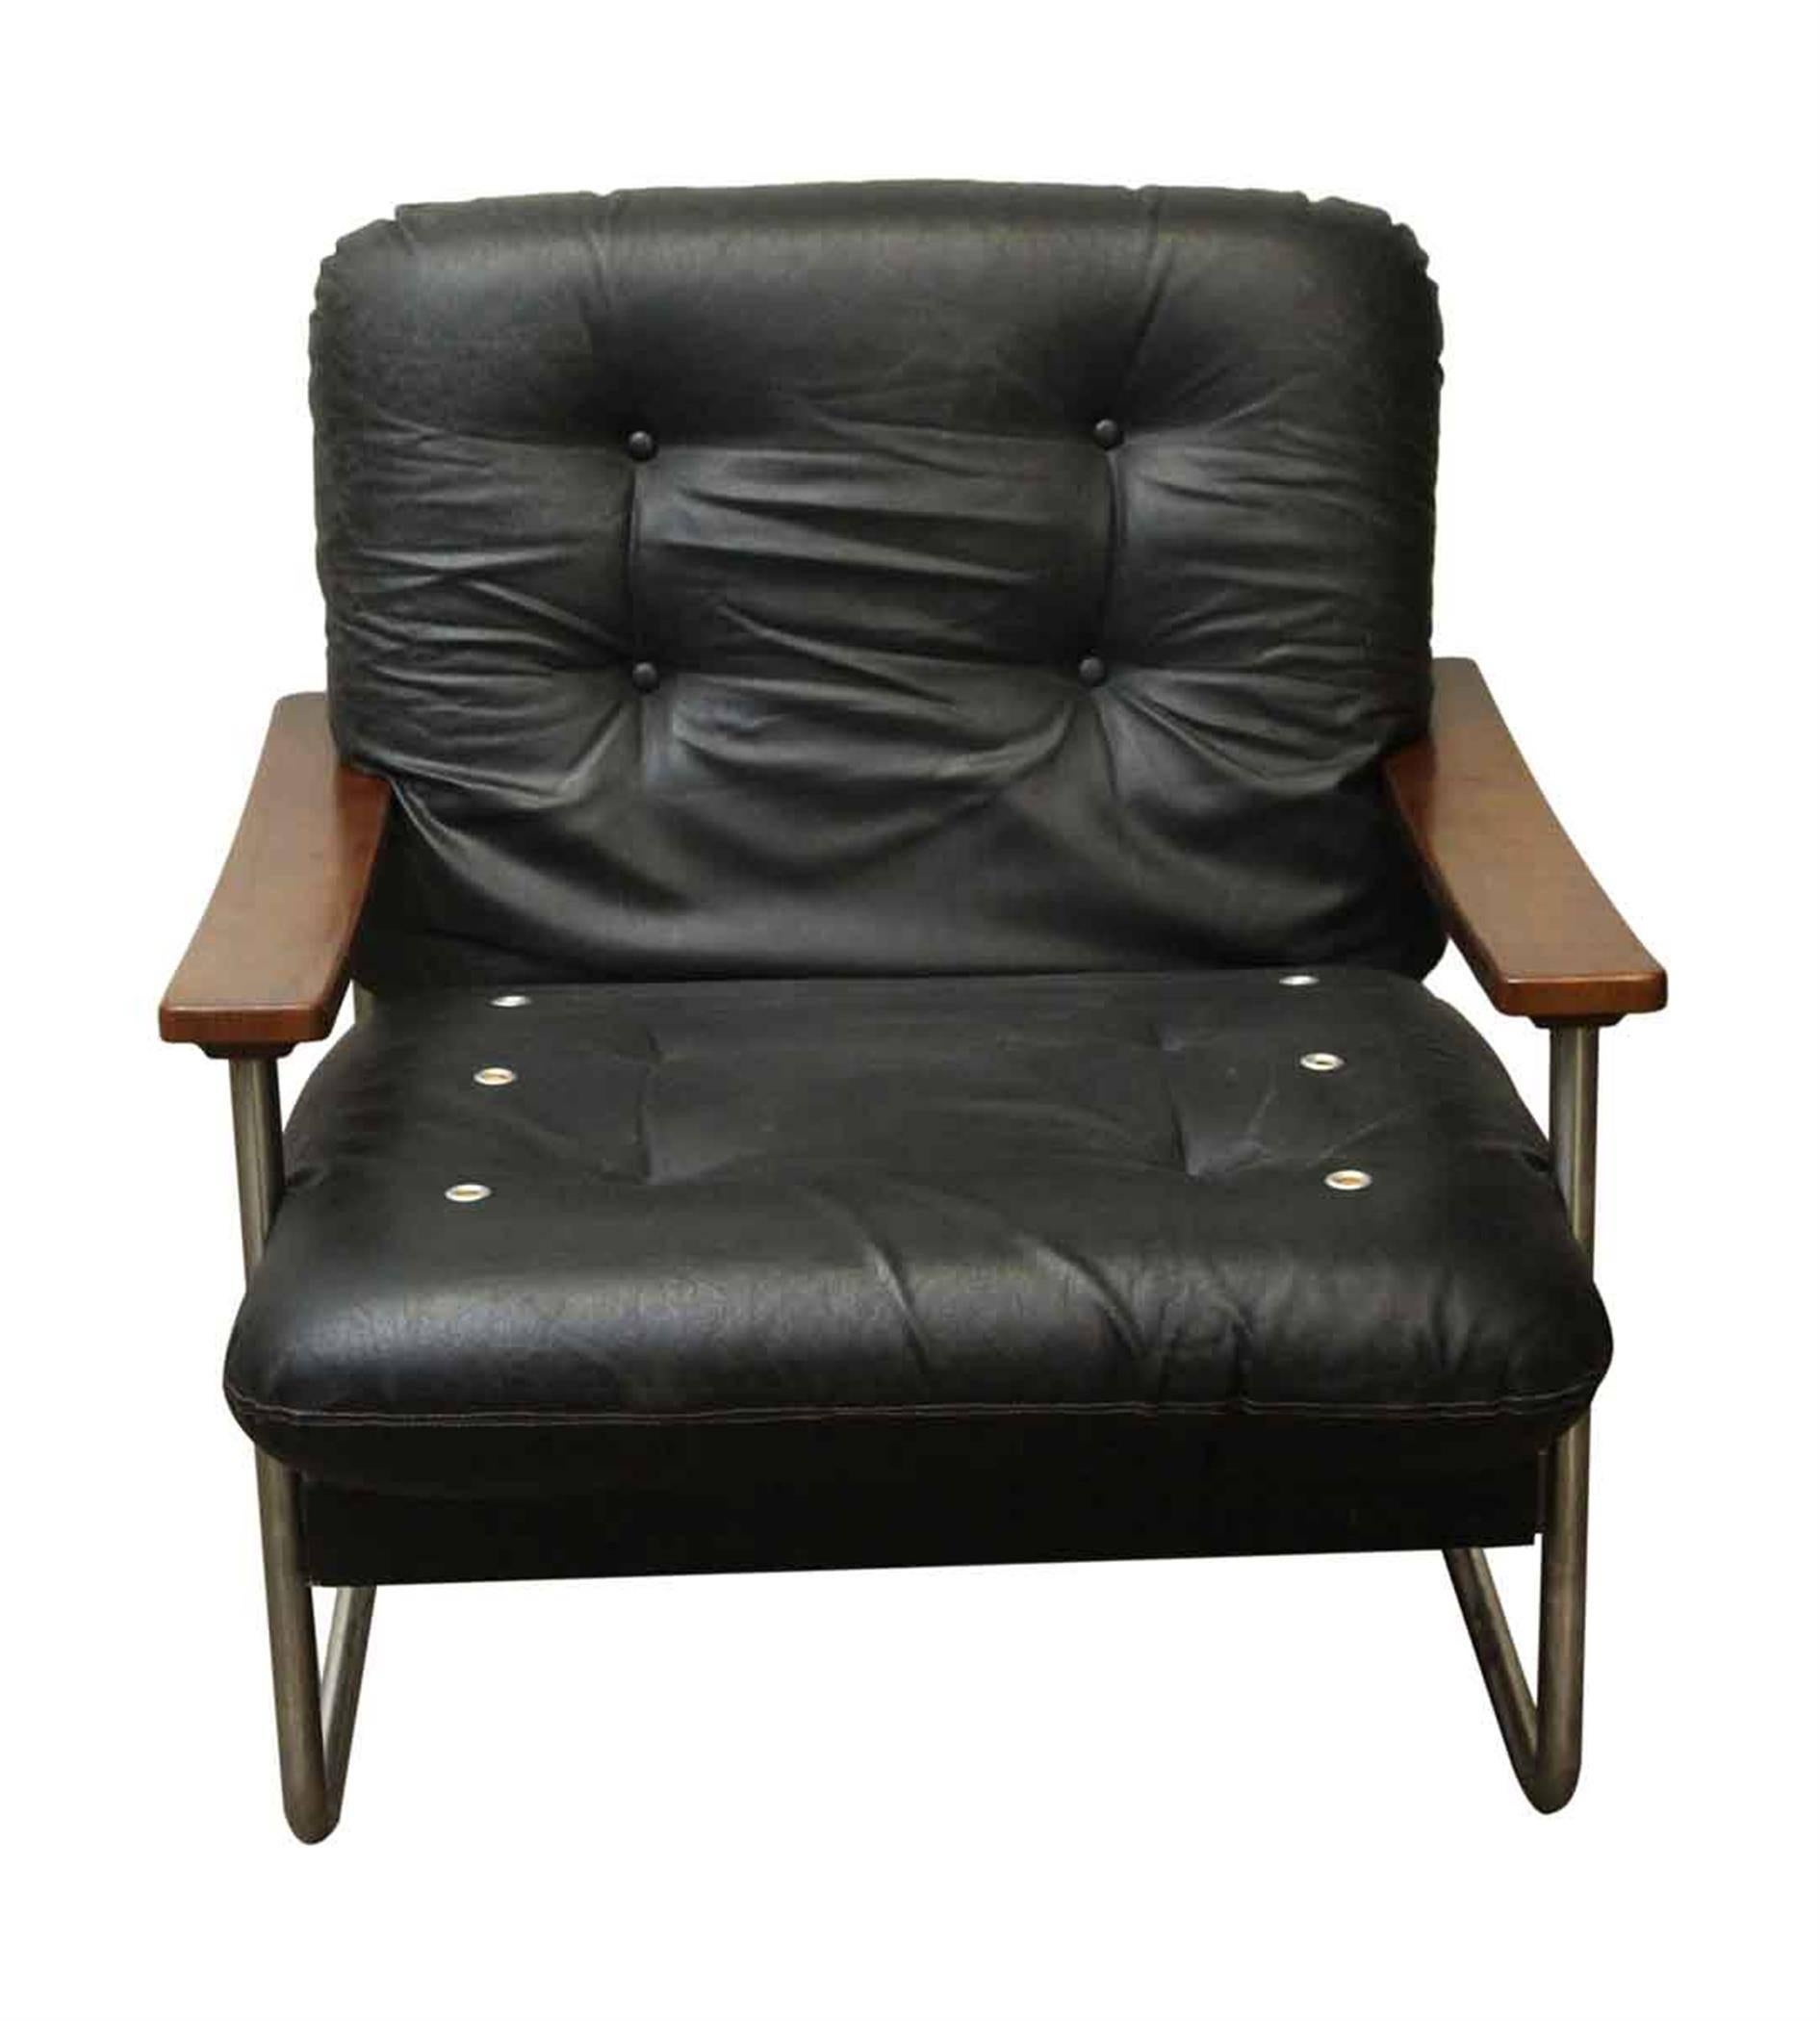 1960s black leather Italian armchair with wooden arms and a chrome-plated steel base. Made by Mobiltecnica. Three available at time of posting. Priced individually. This can be seen at our 2420 Broadway location on the upper west side in Manhattan.